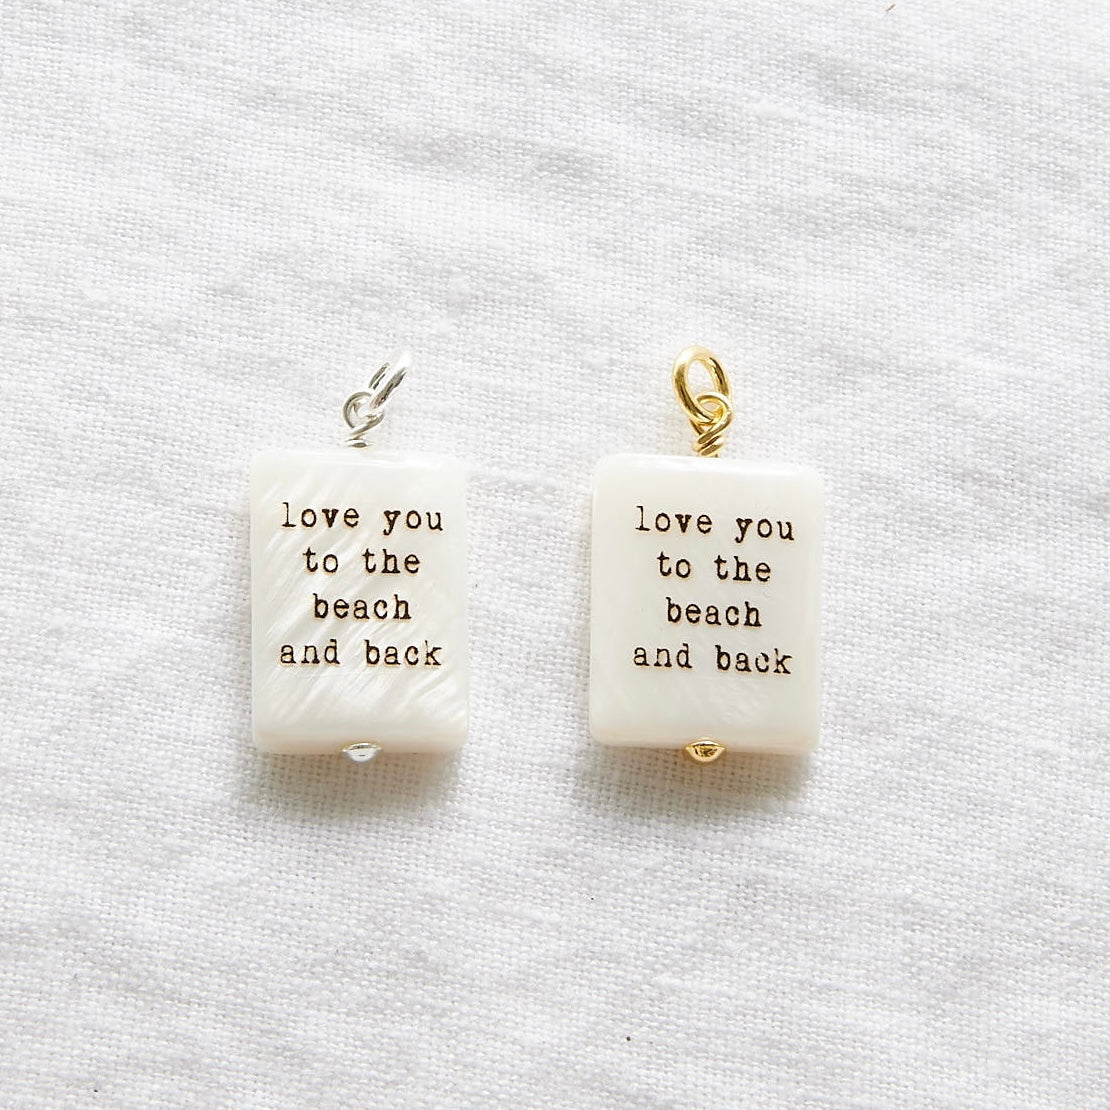 Love you to the beach and back pendant